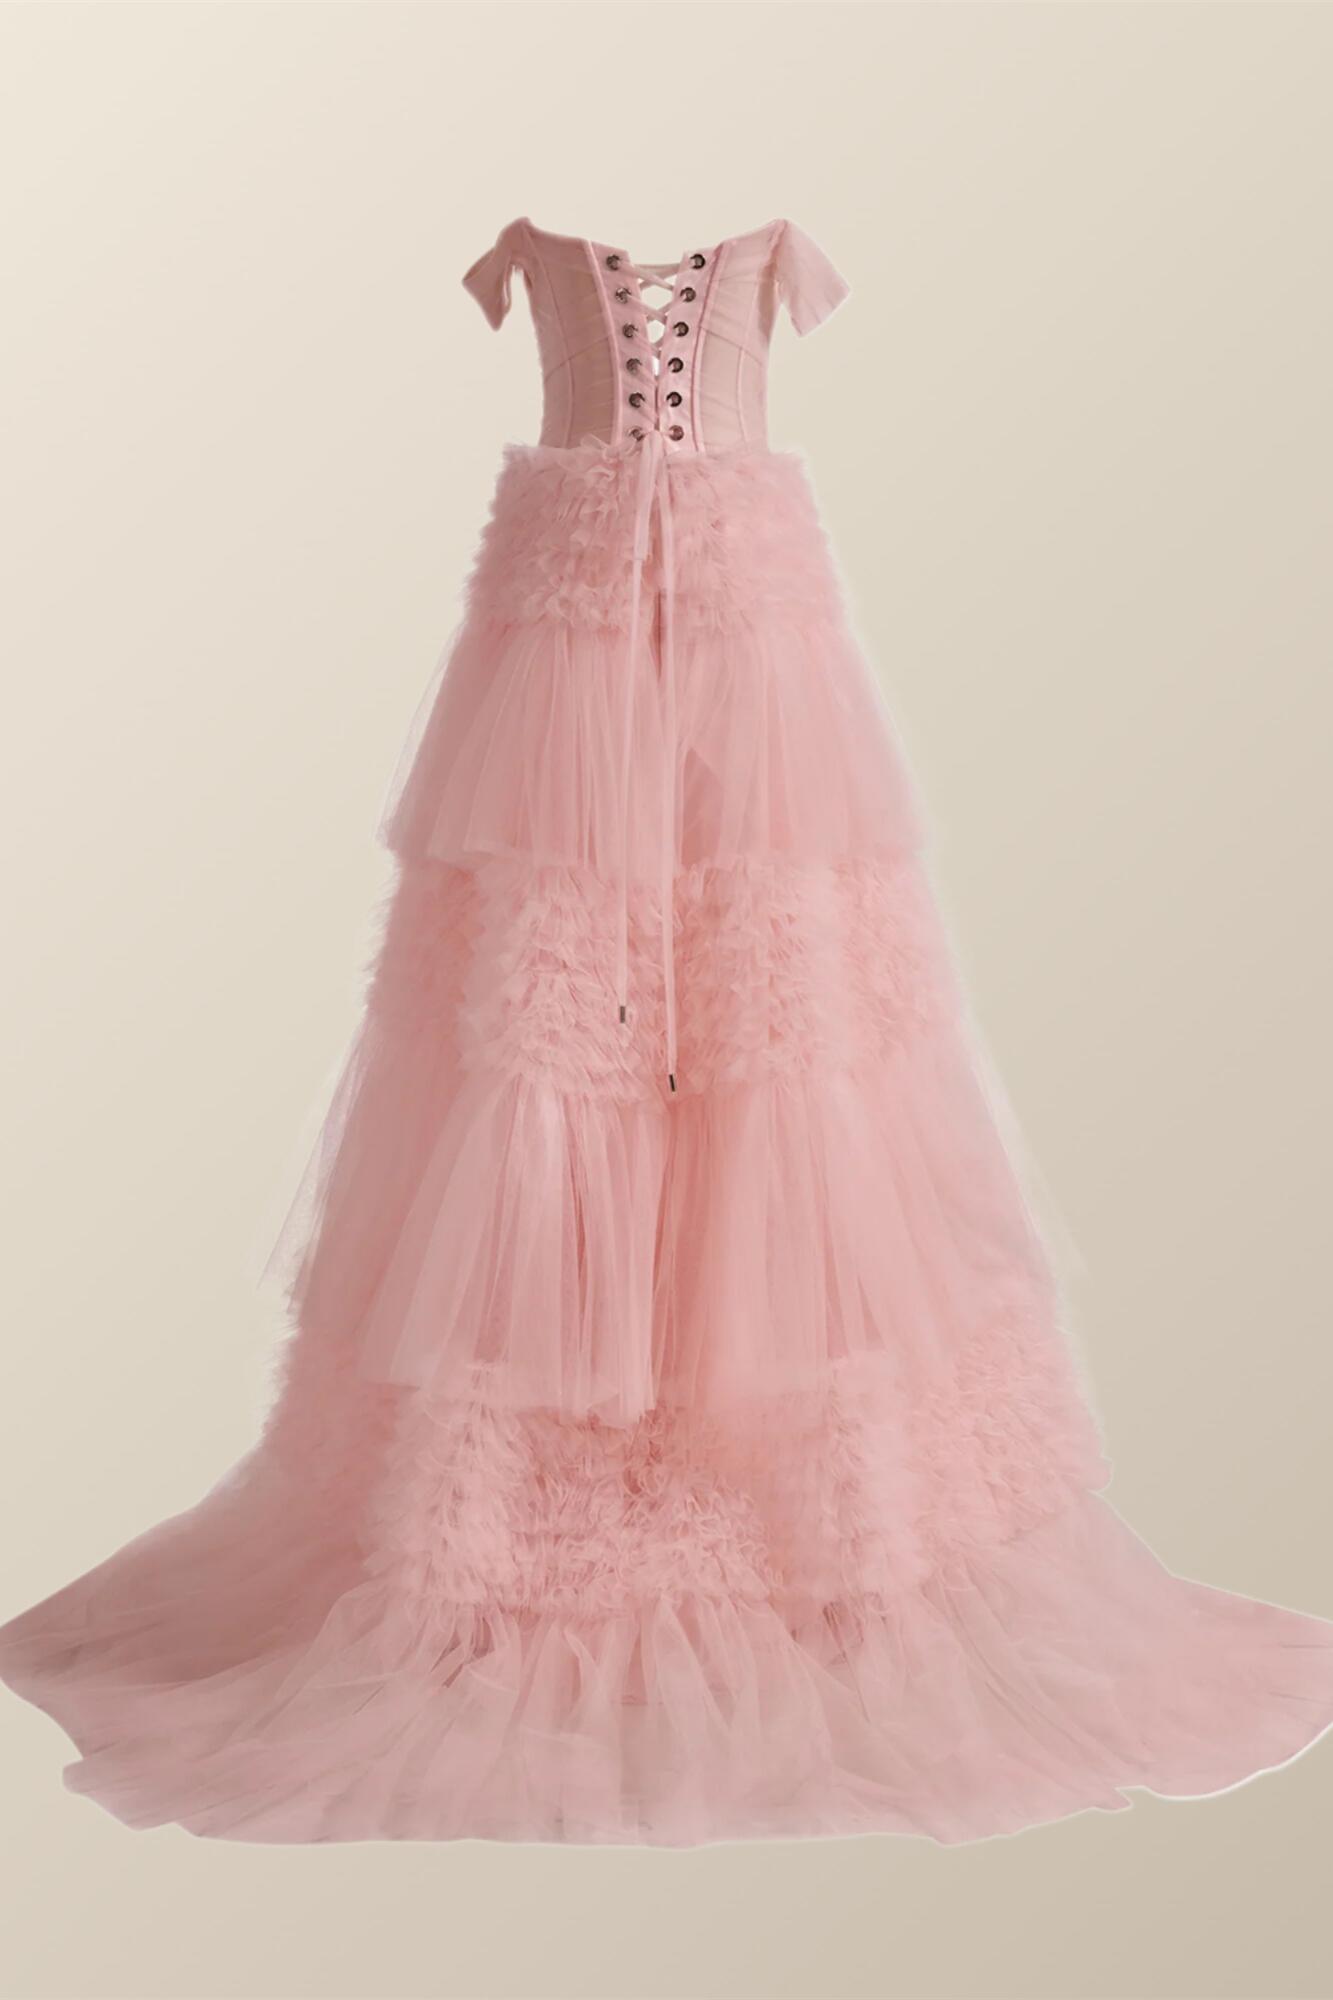 Off the Shoulder Blush Pink Ruffles Tulle Gown